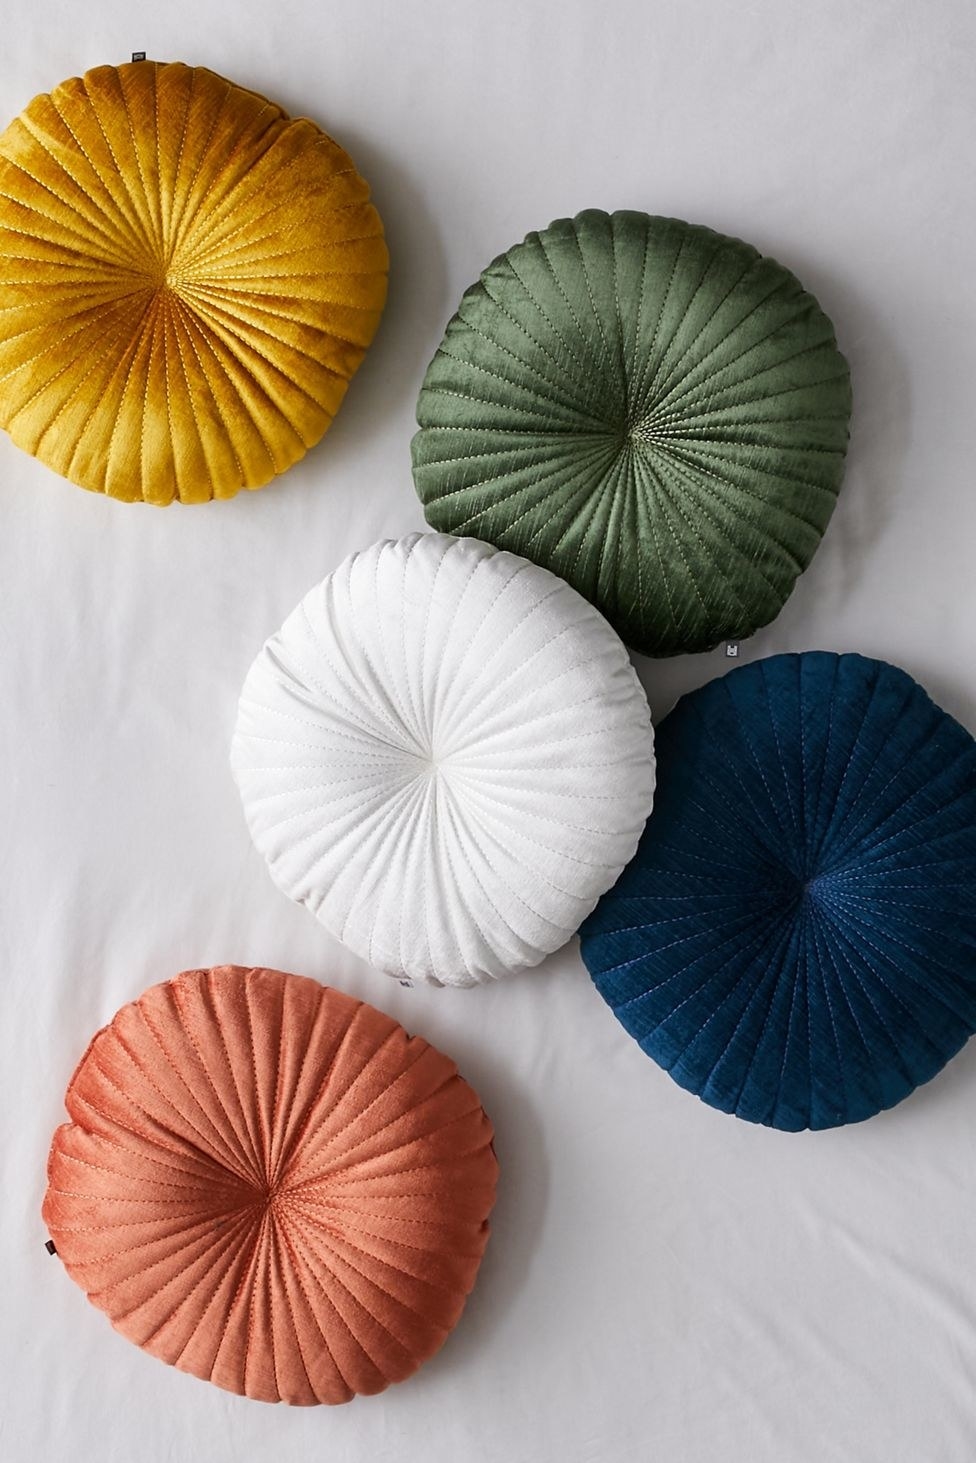 round tufted pillows in white, orange, yellow, green, and blue